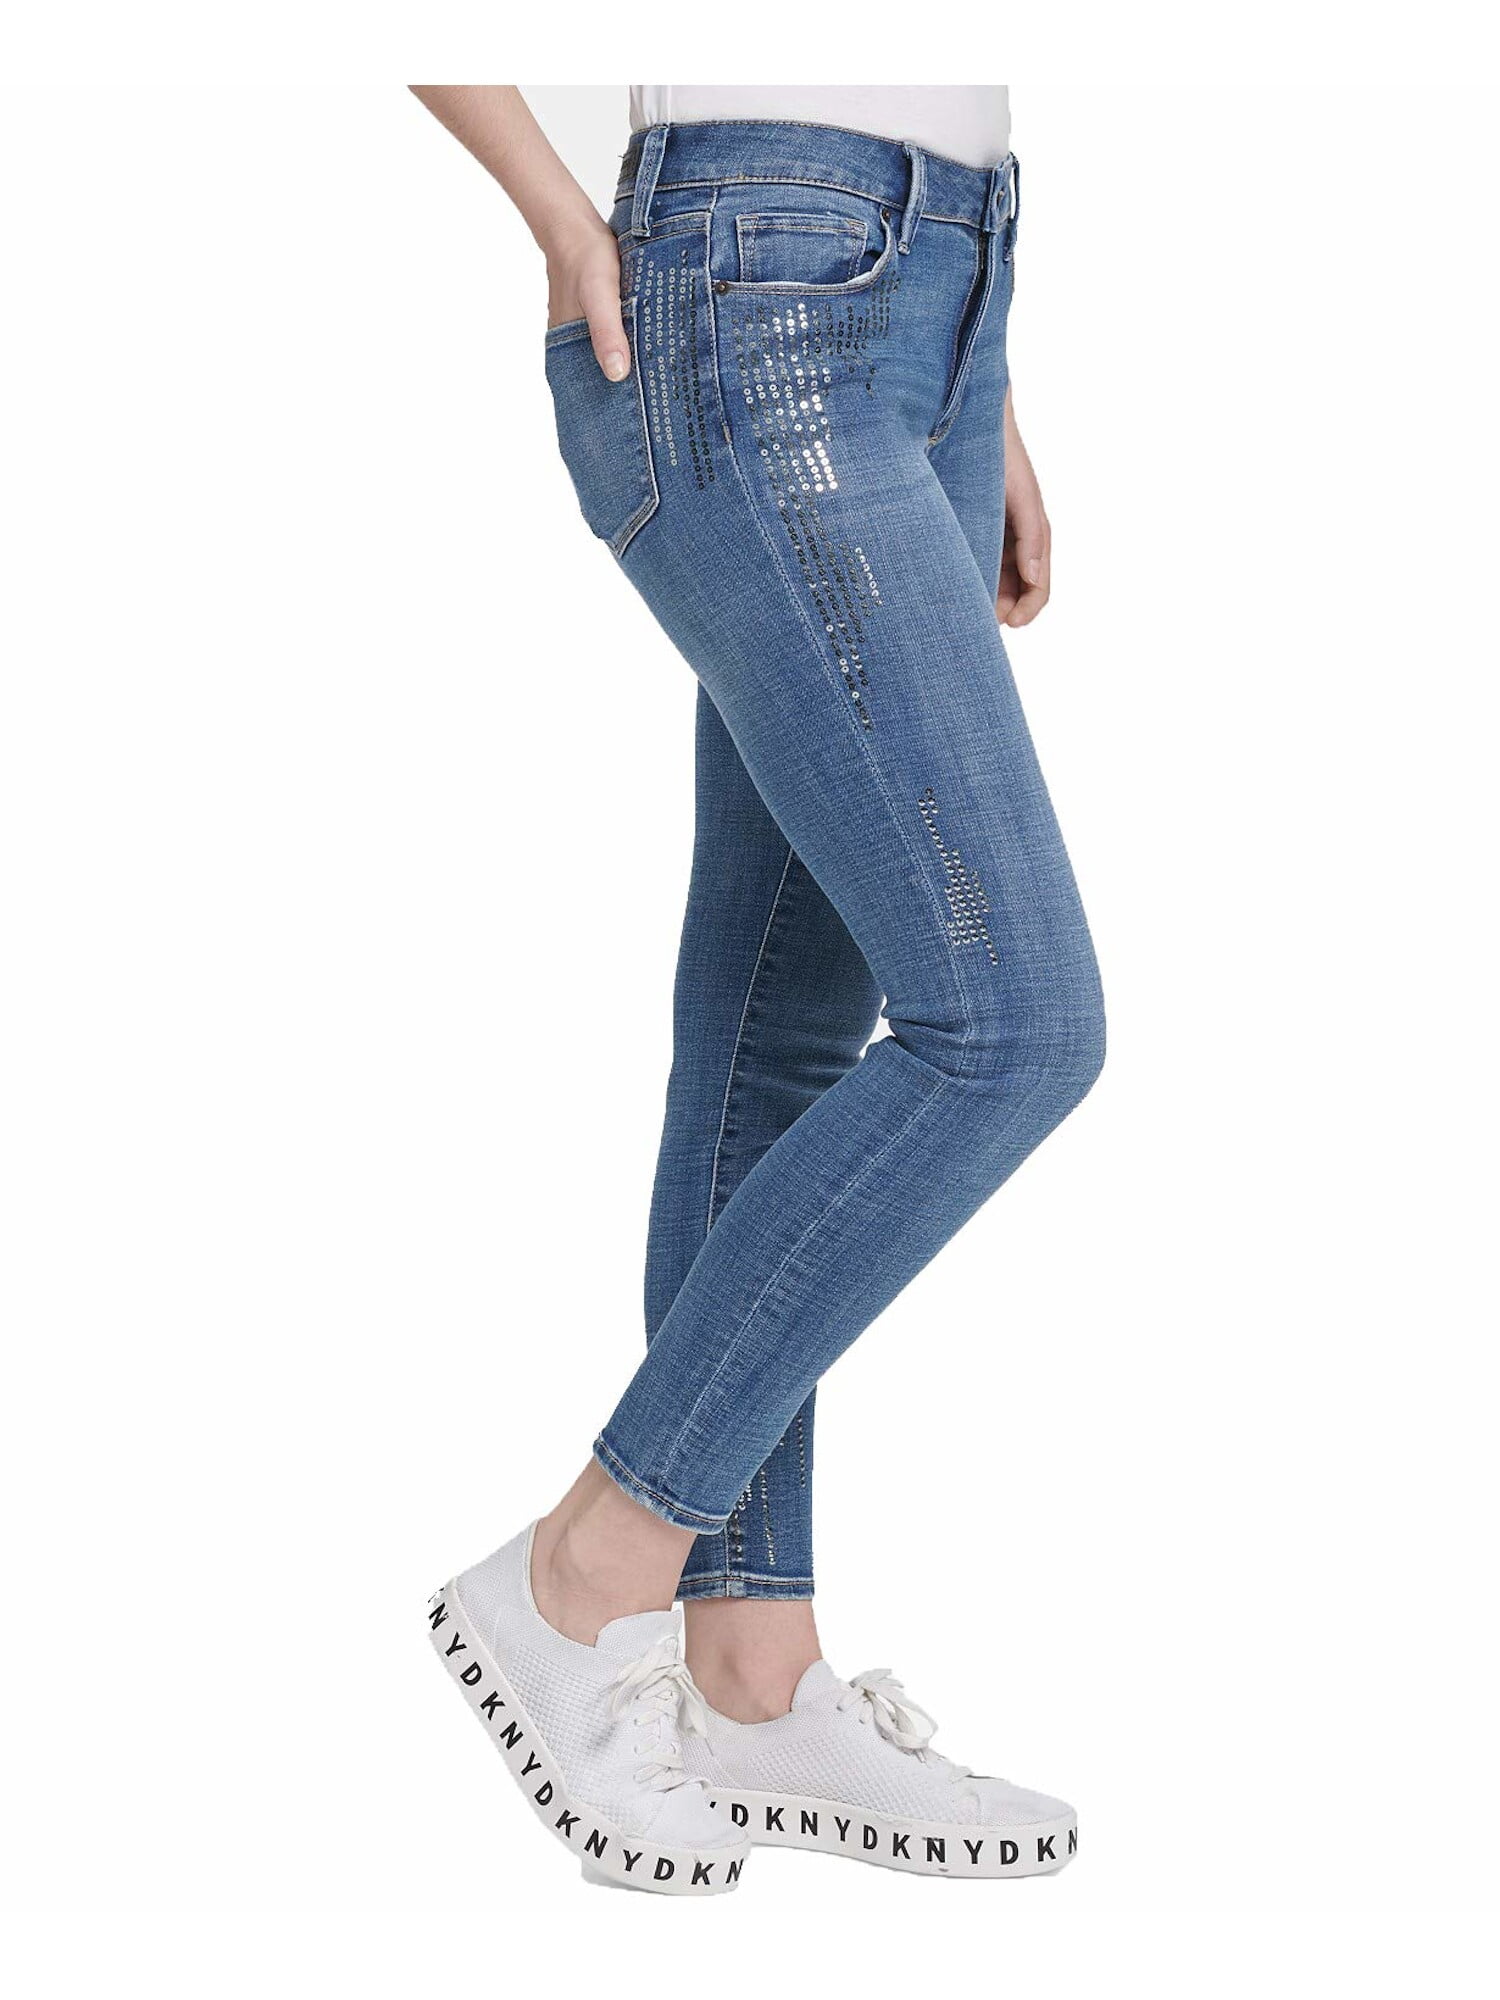 womens 26 jeans size